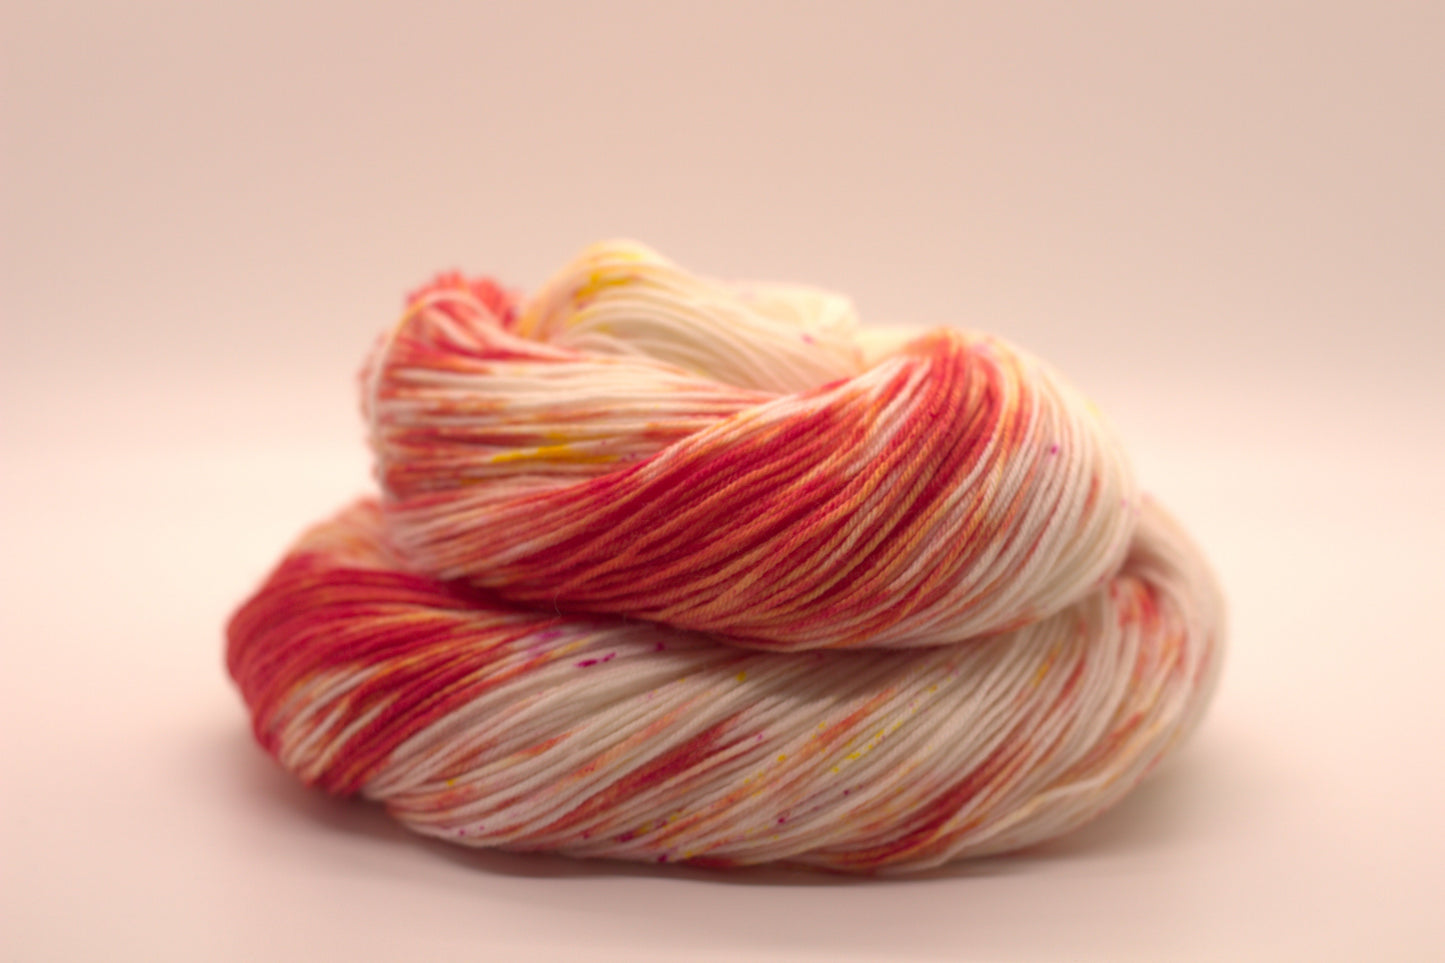 One curled skein orange, yellow and magenta speckled yarn on white background.